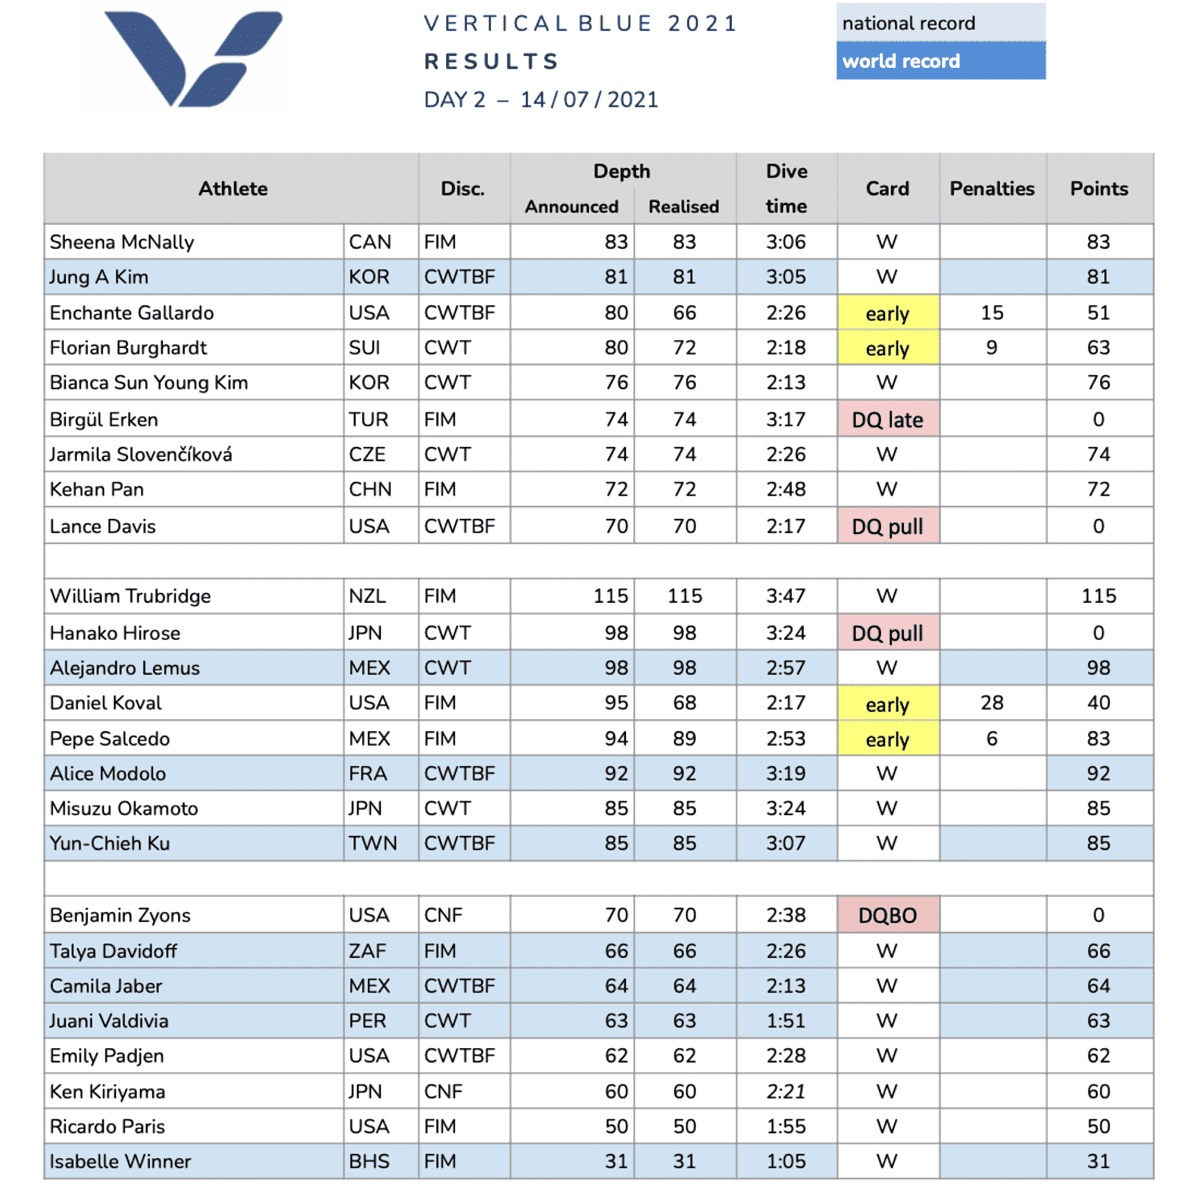 2021 Vertical Blue Day 2 results